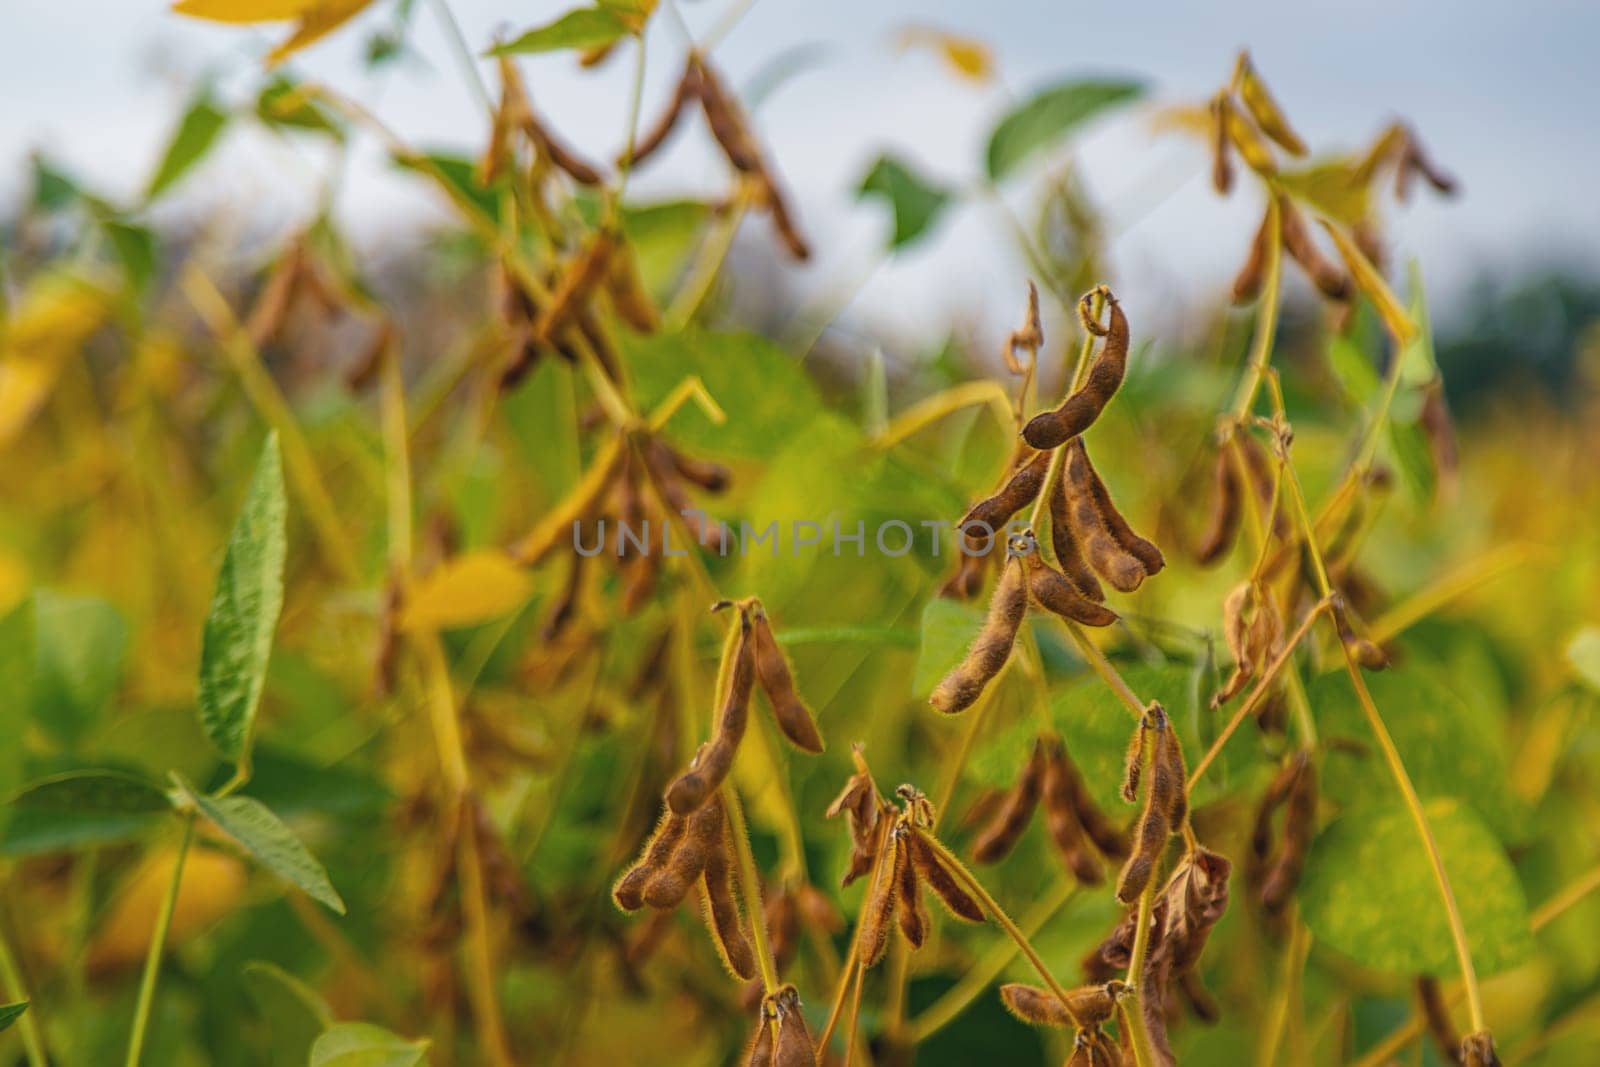 soybean grows on the field. Selective focus. nature.